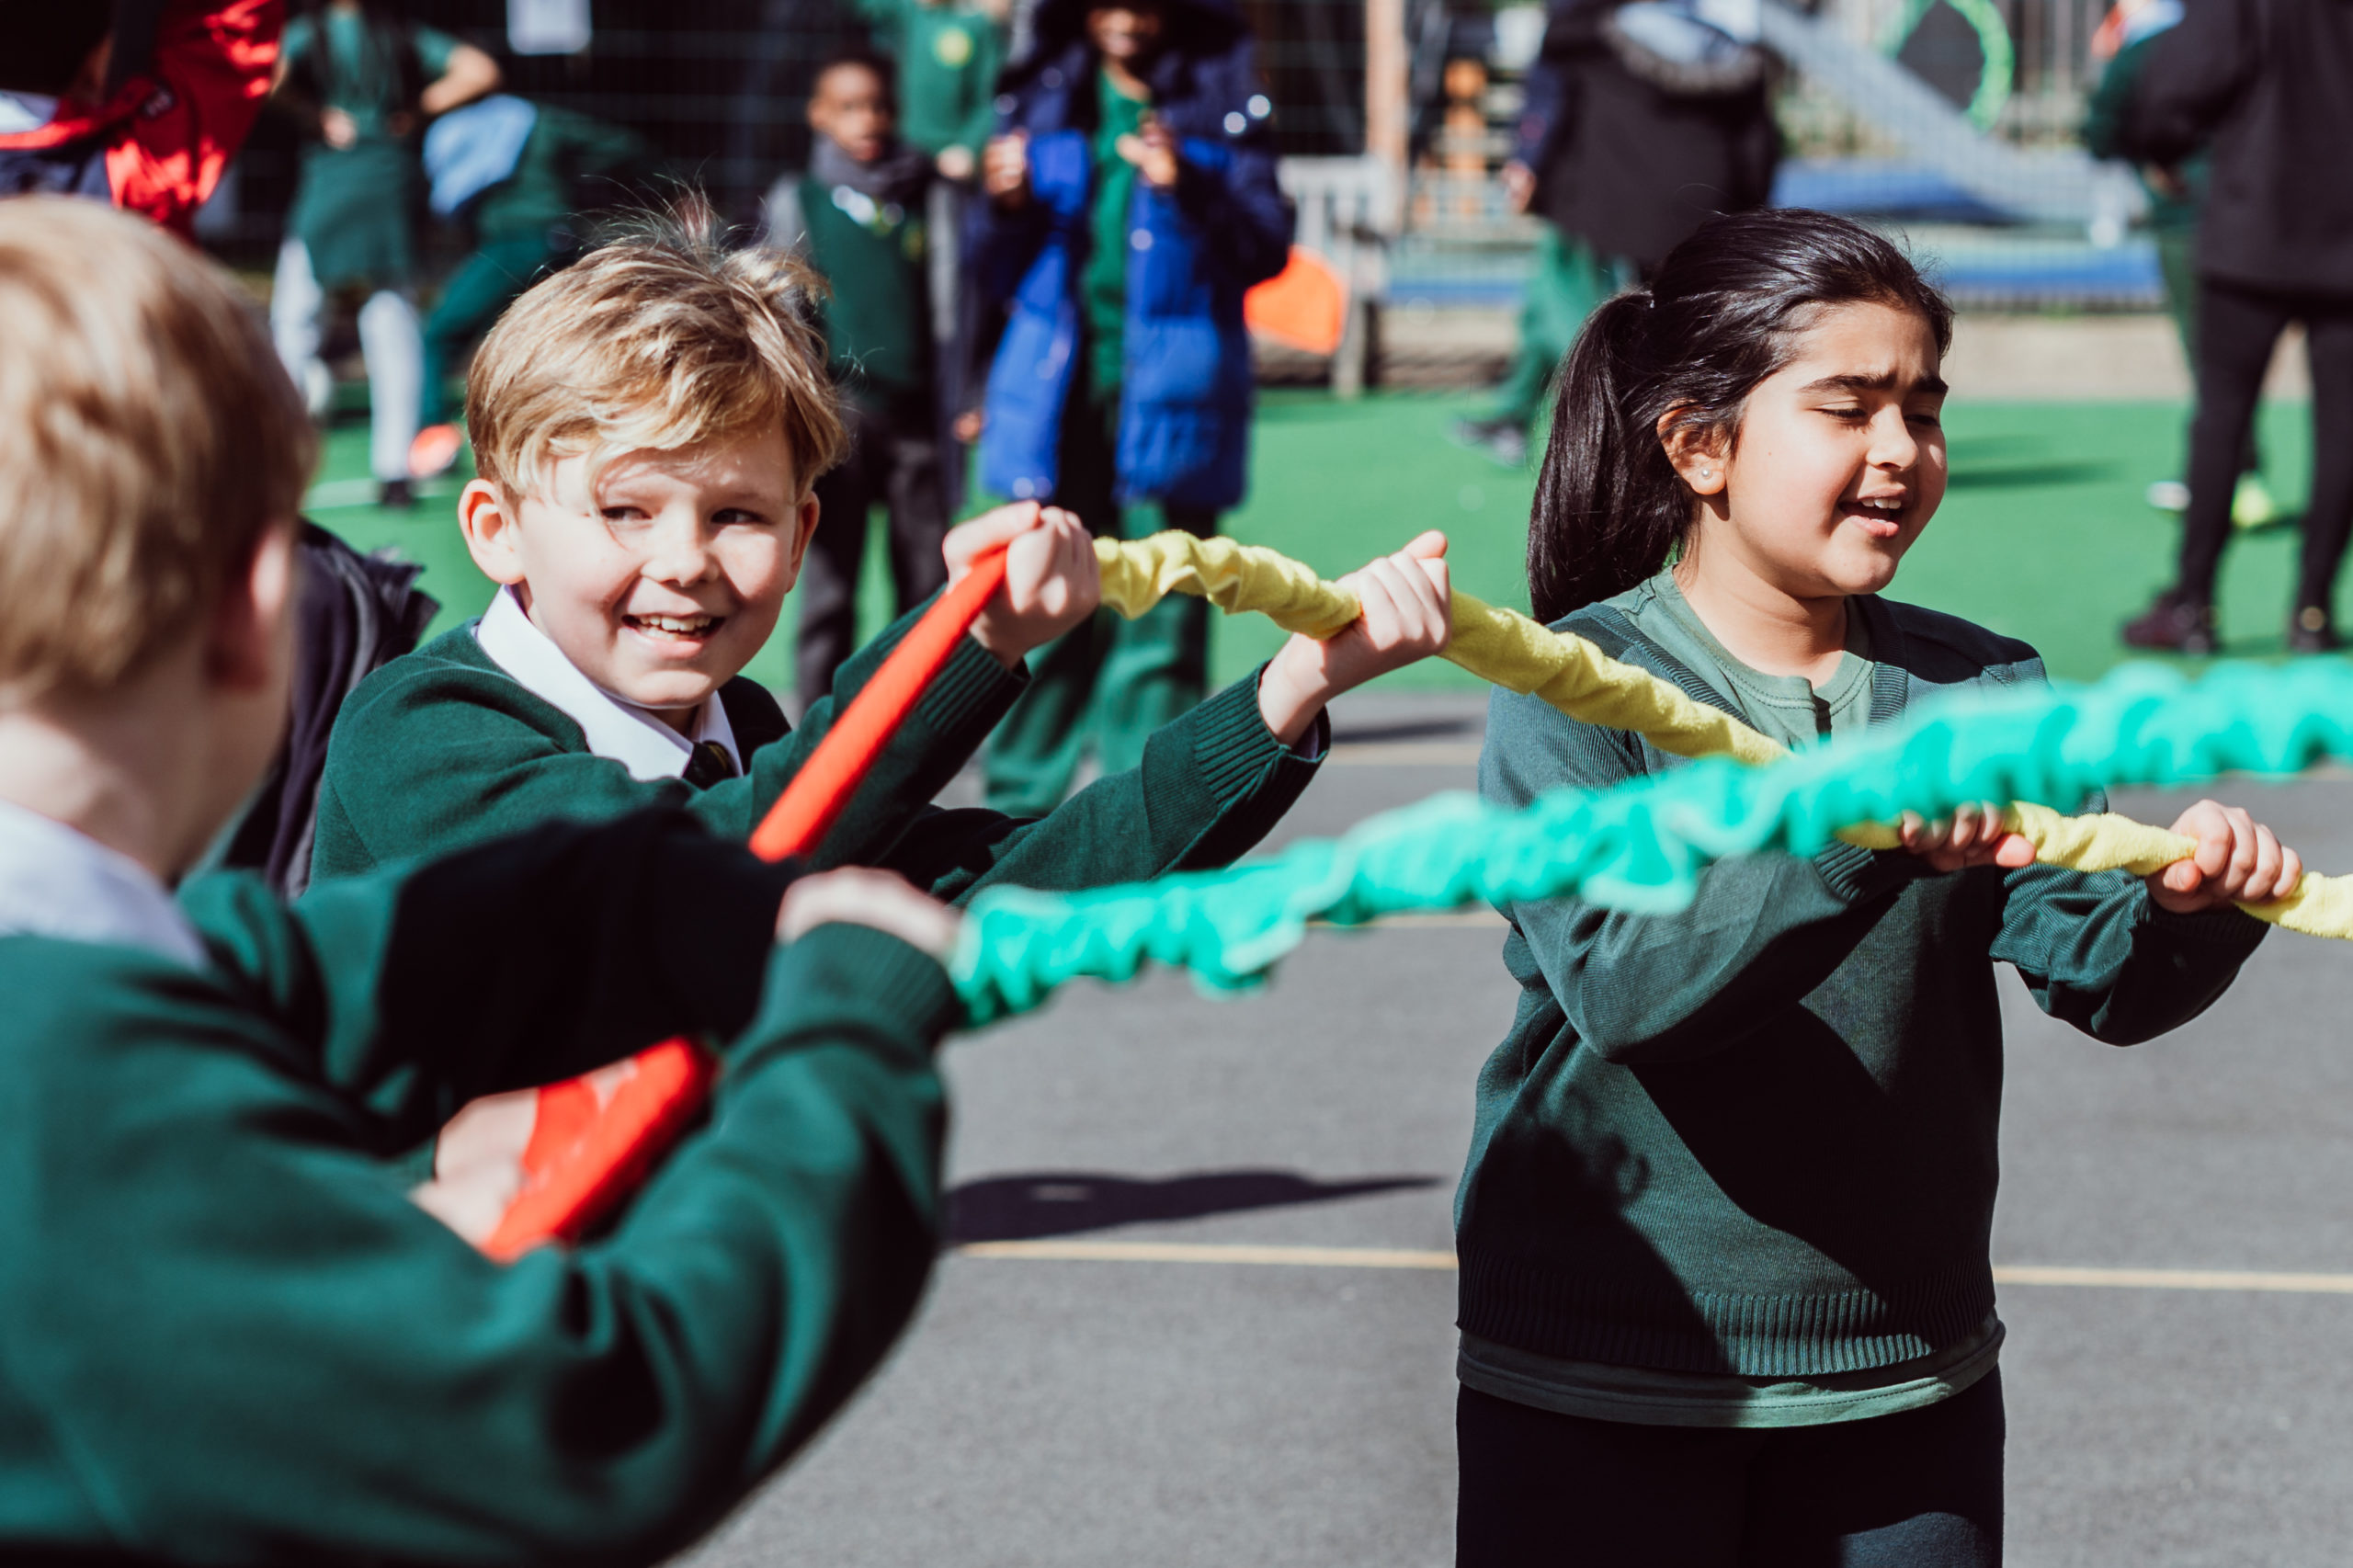 Three KS2 primary pupils holding a red, yellow, green giant scrunchie singing in the playground.